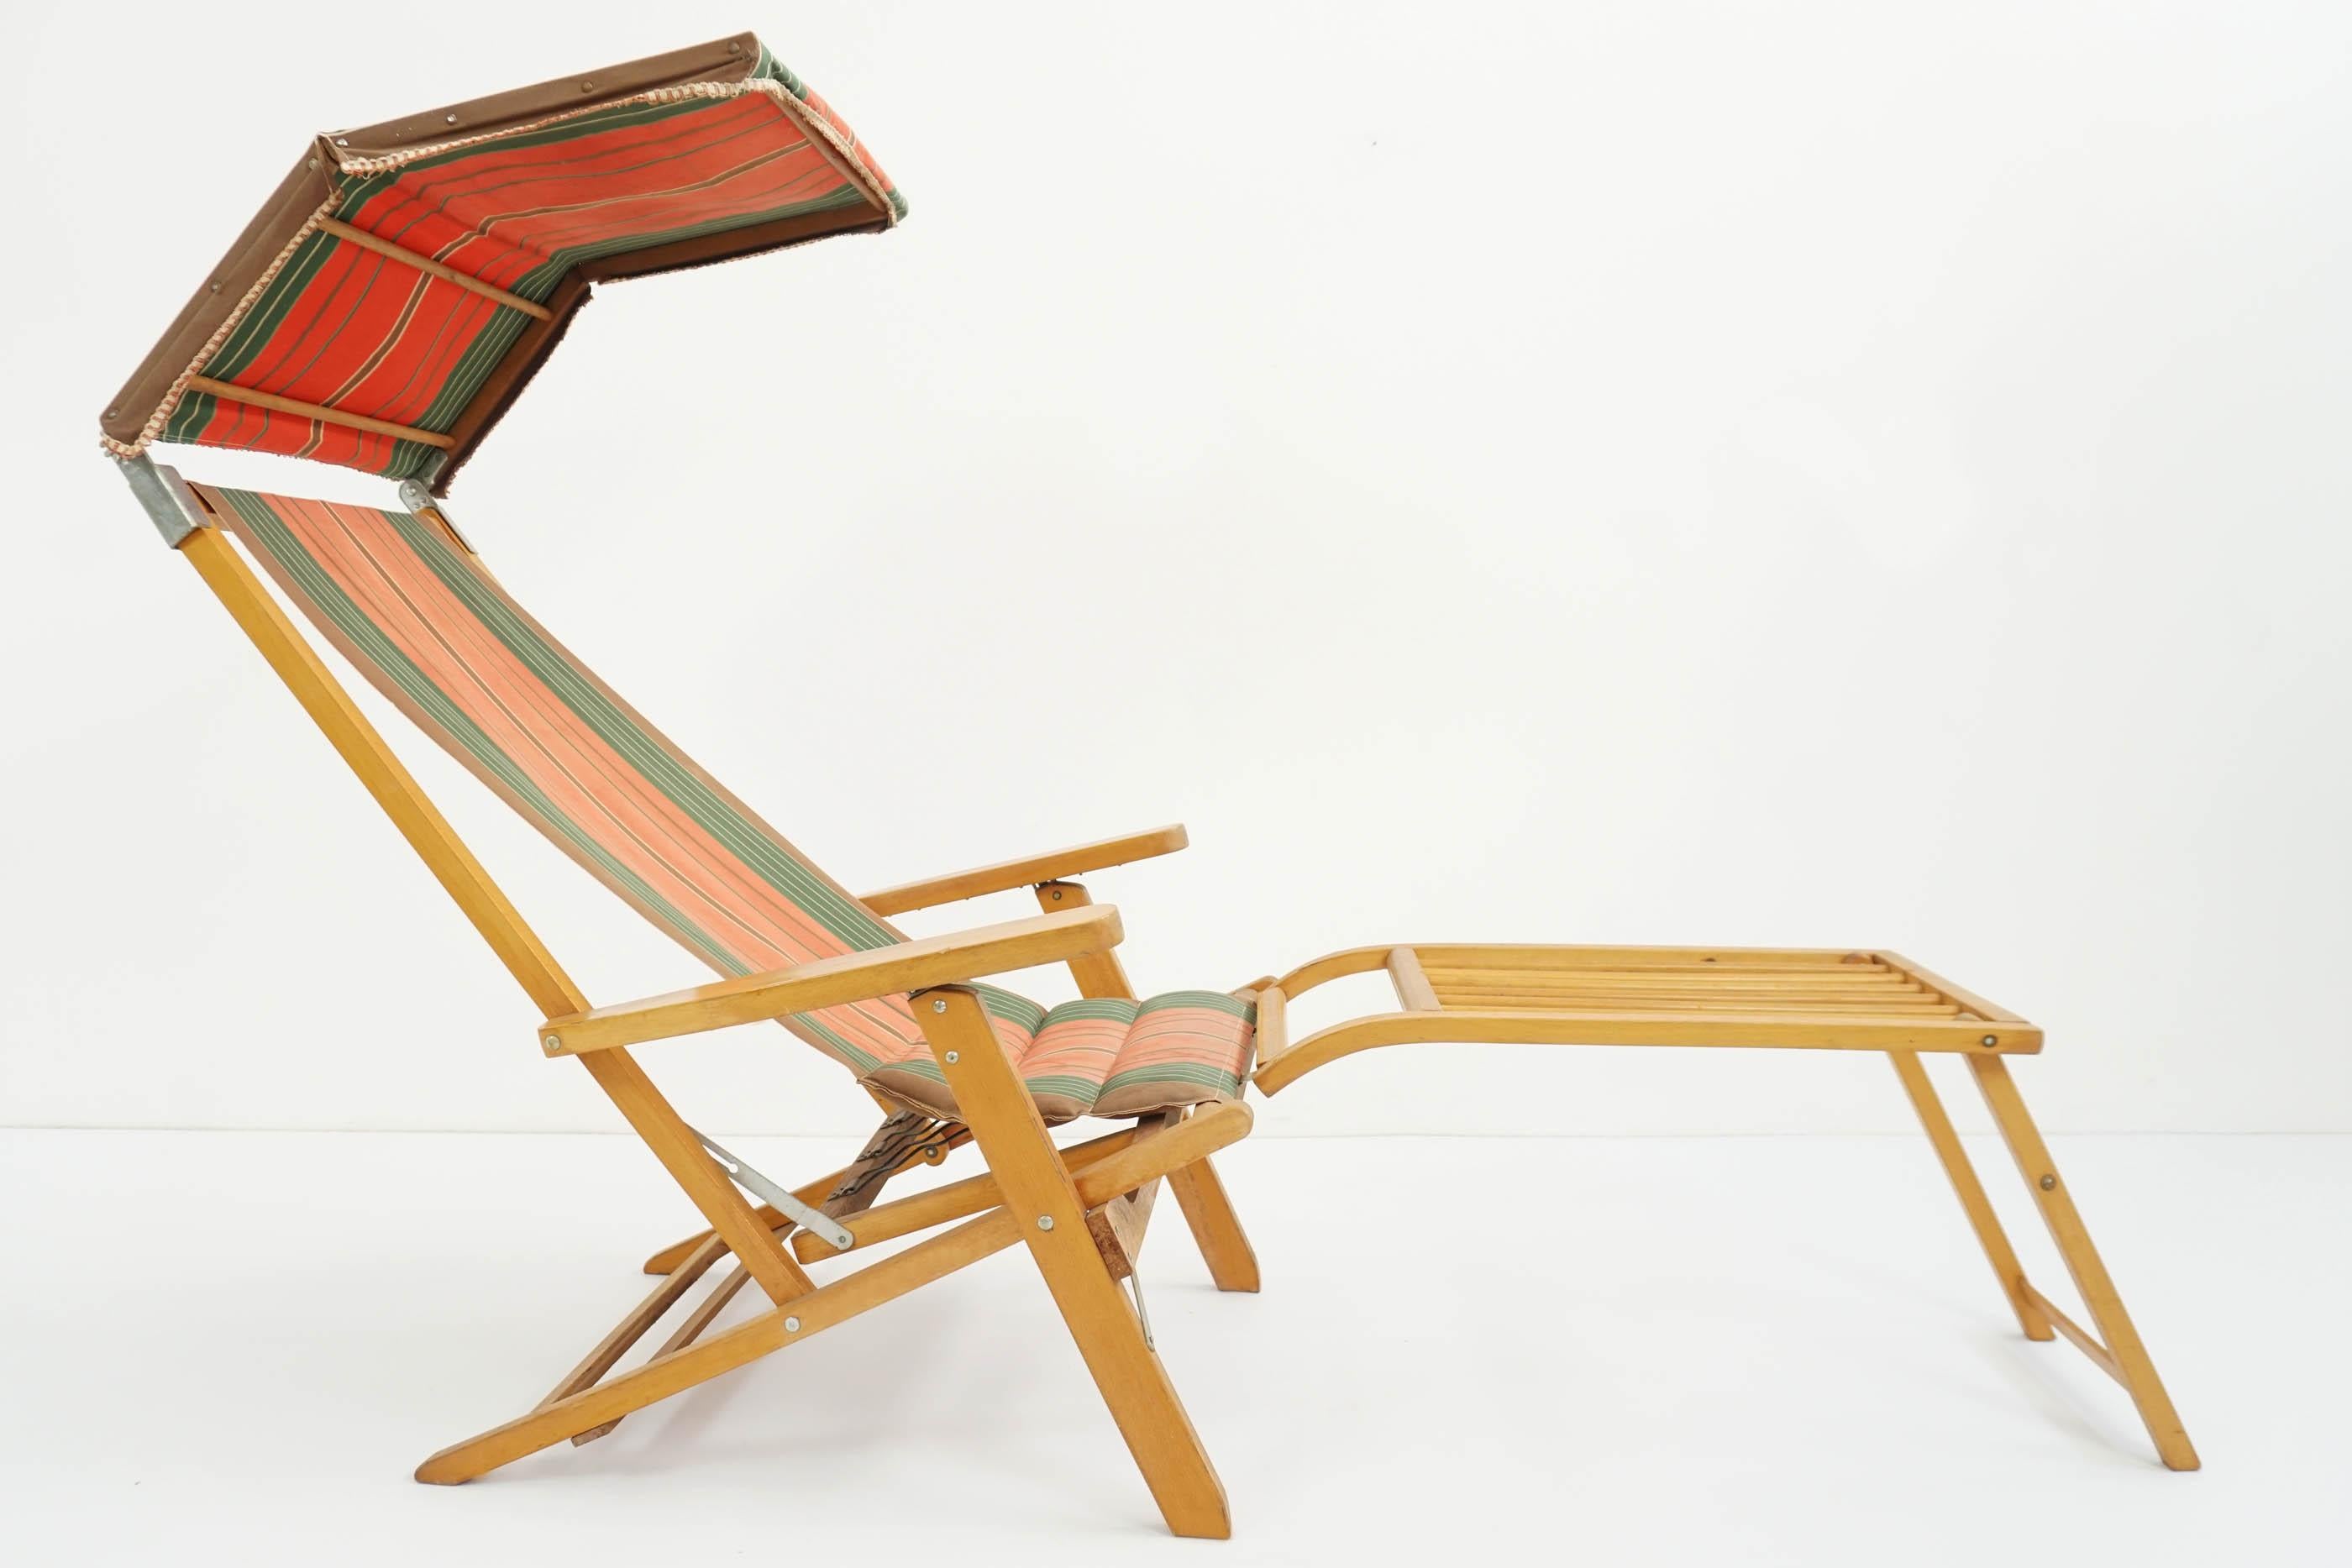 Travelling lounge chair for outdoor totally demountable and foldable
Made by Luchs, Sweden, 1950.